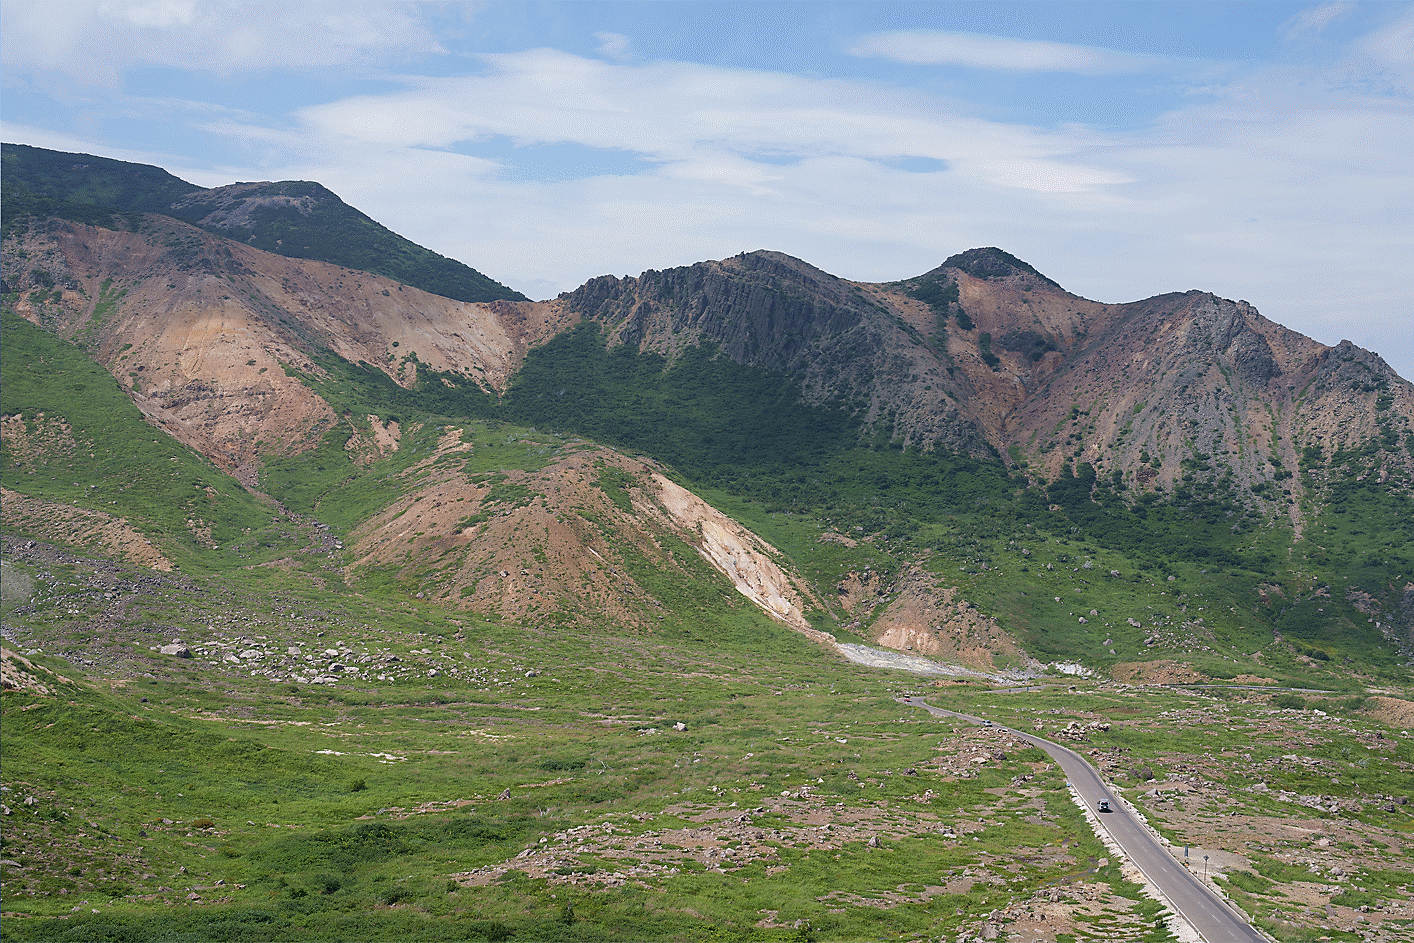 Image of a mountain